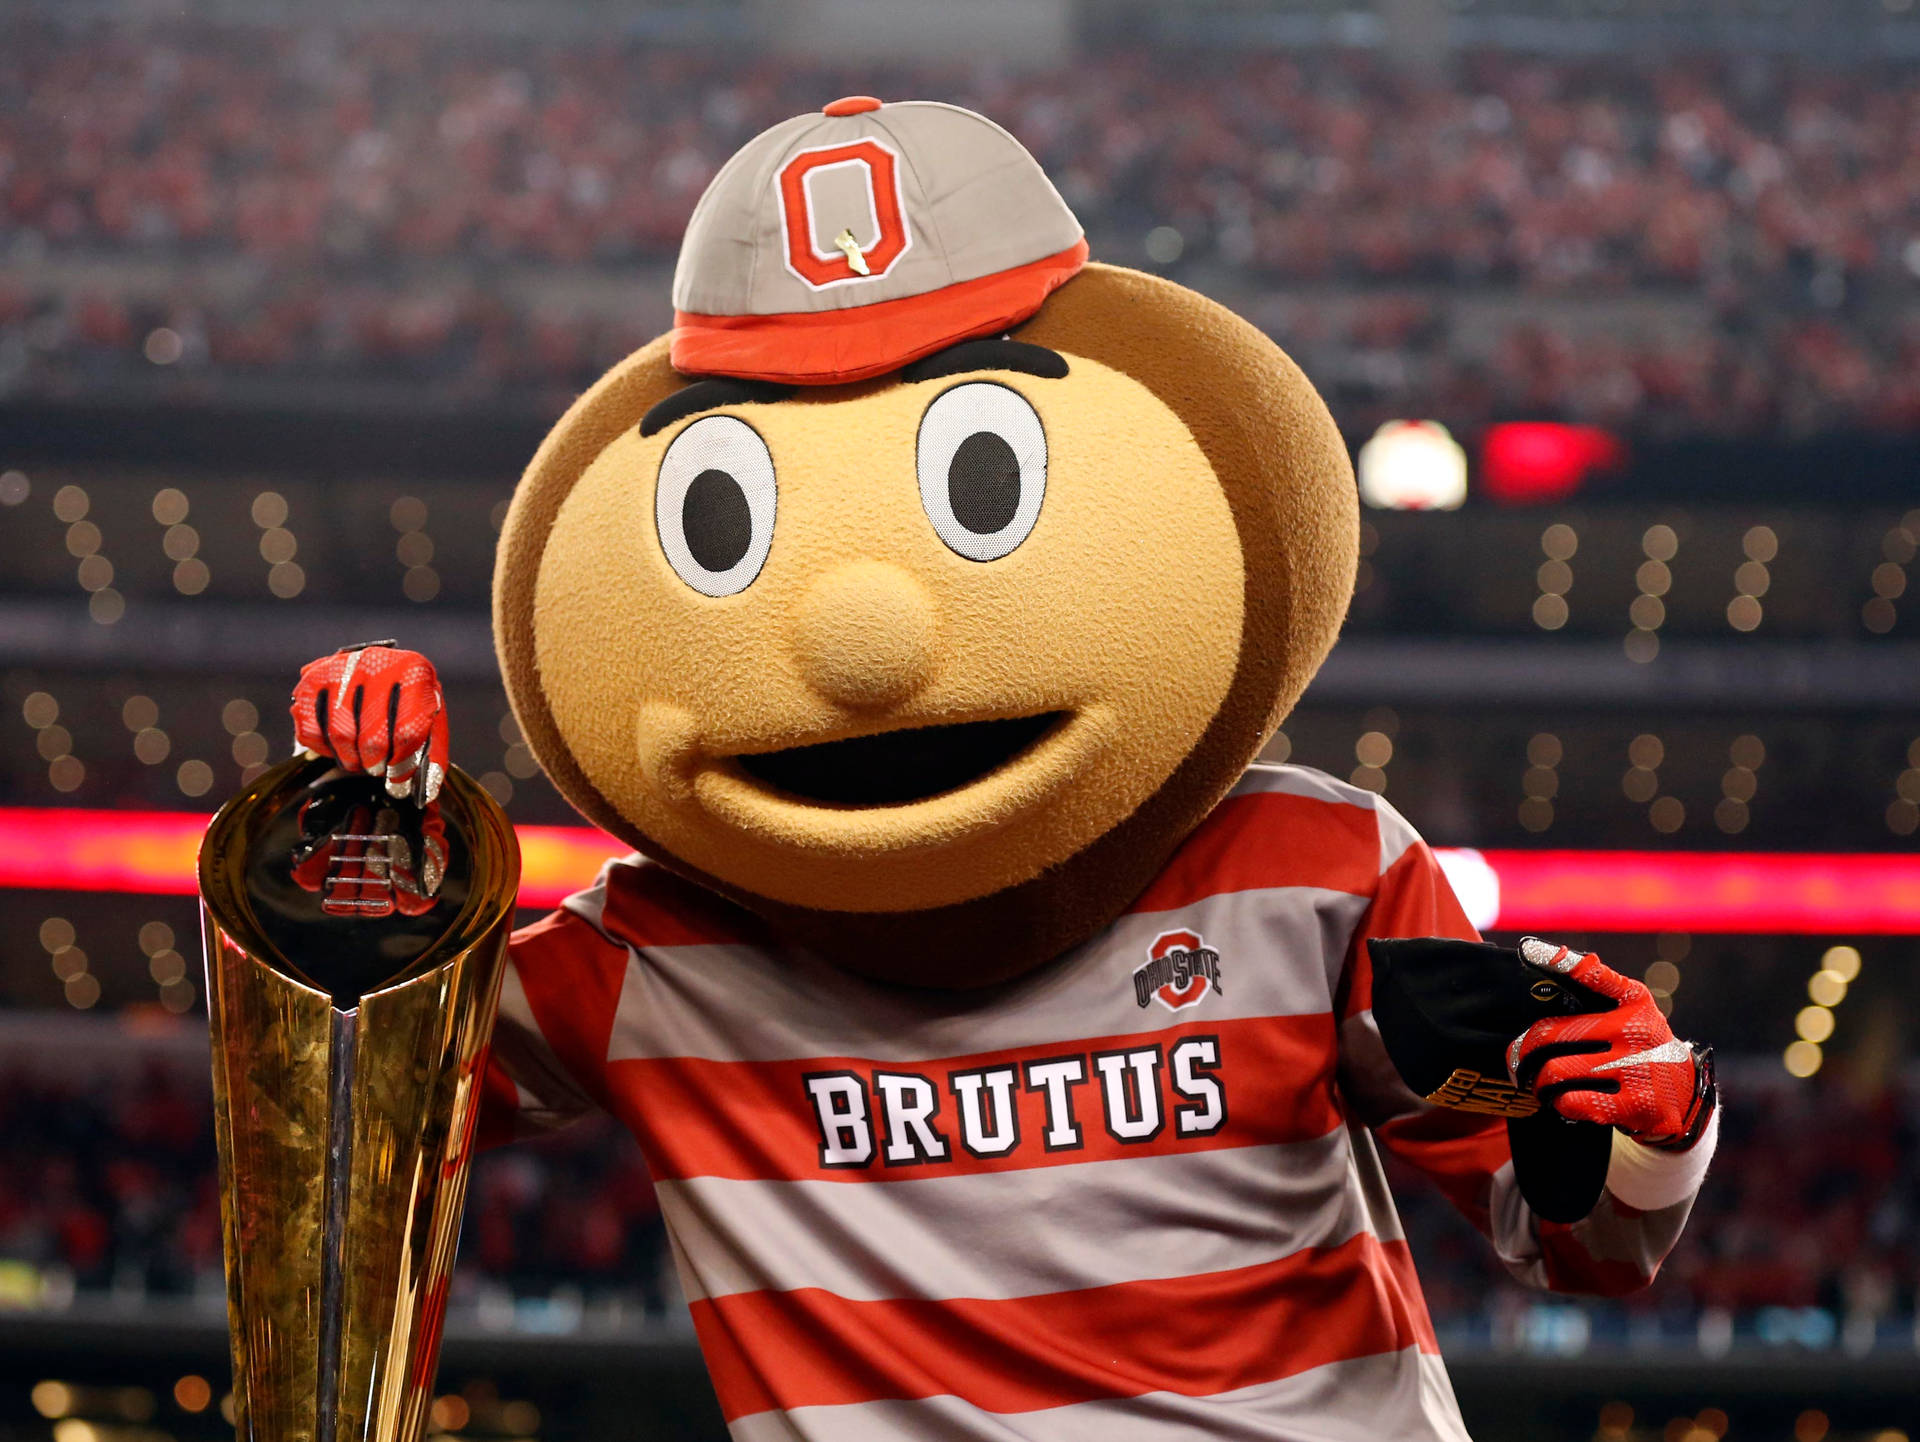 College Football Brutus Mascot Background